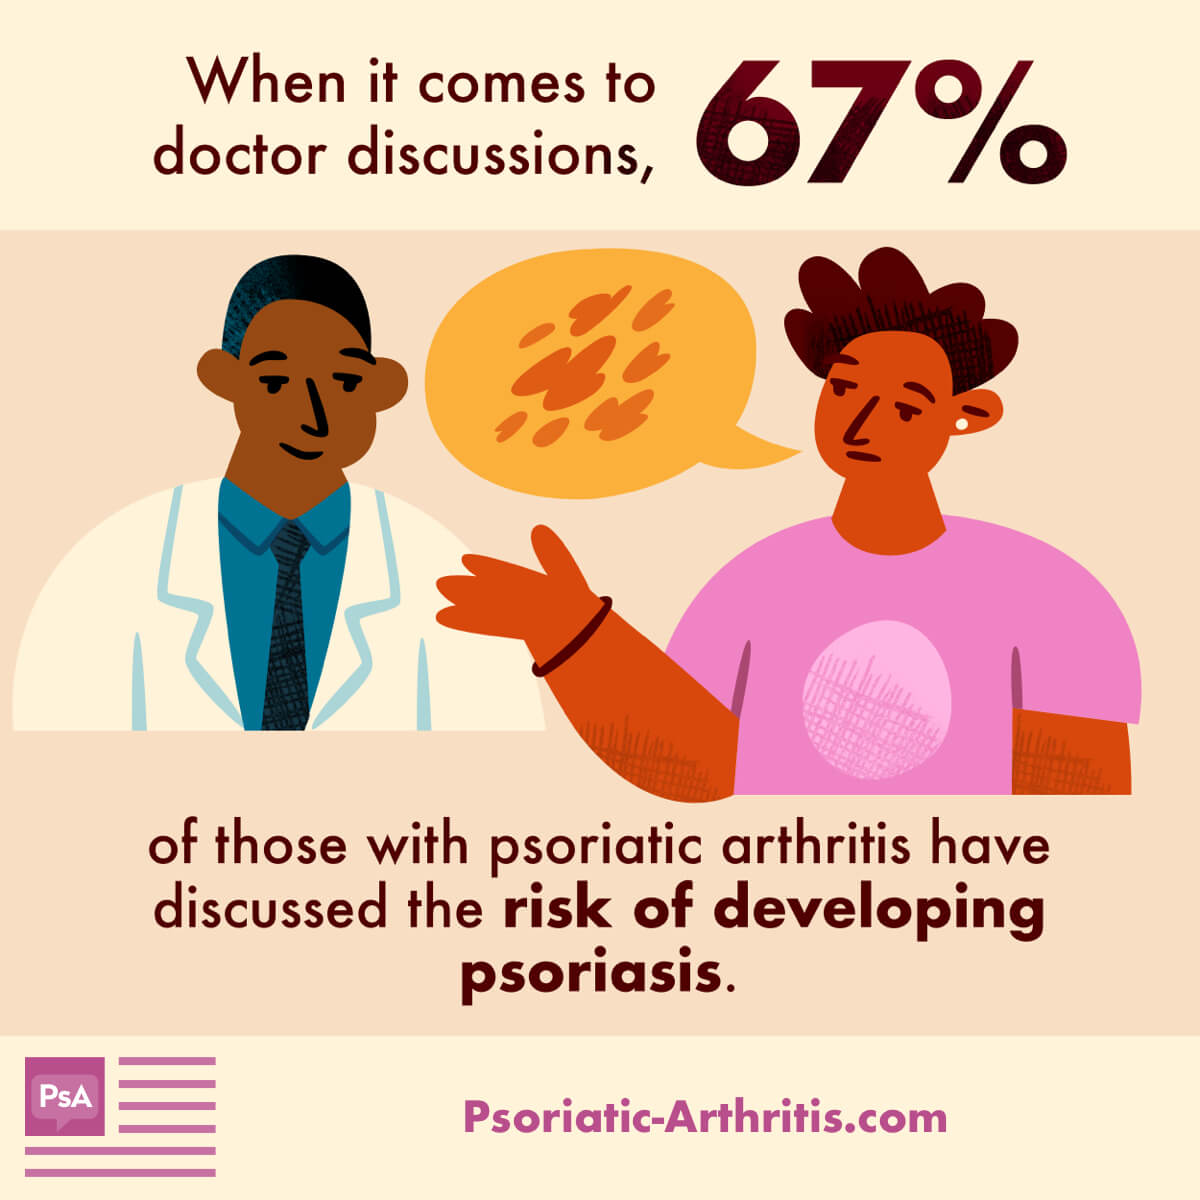 When it comes to doctor discussions, 67% of those with psoriatic arthritis have discussed the risk of developing psoriasis.